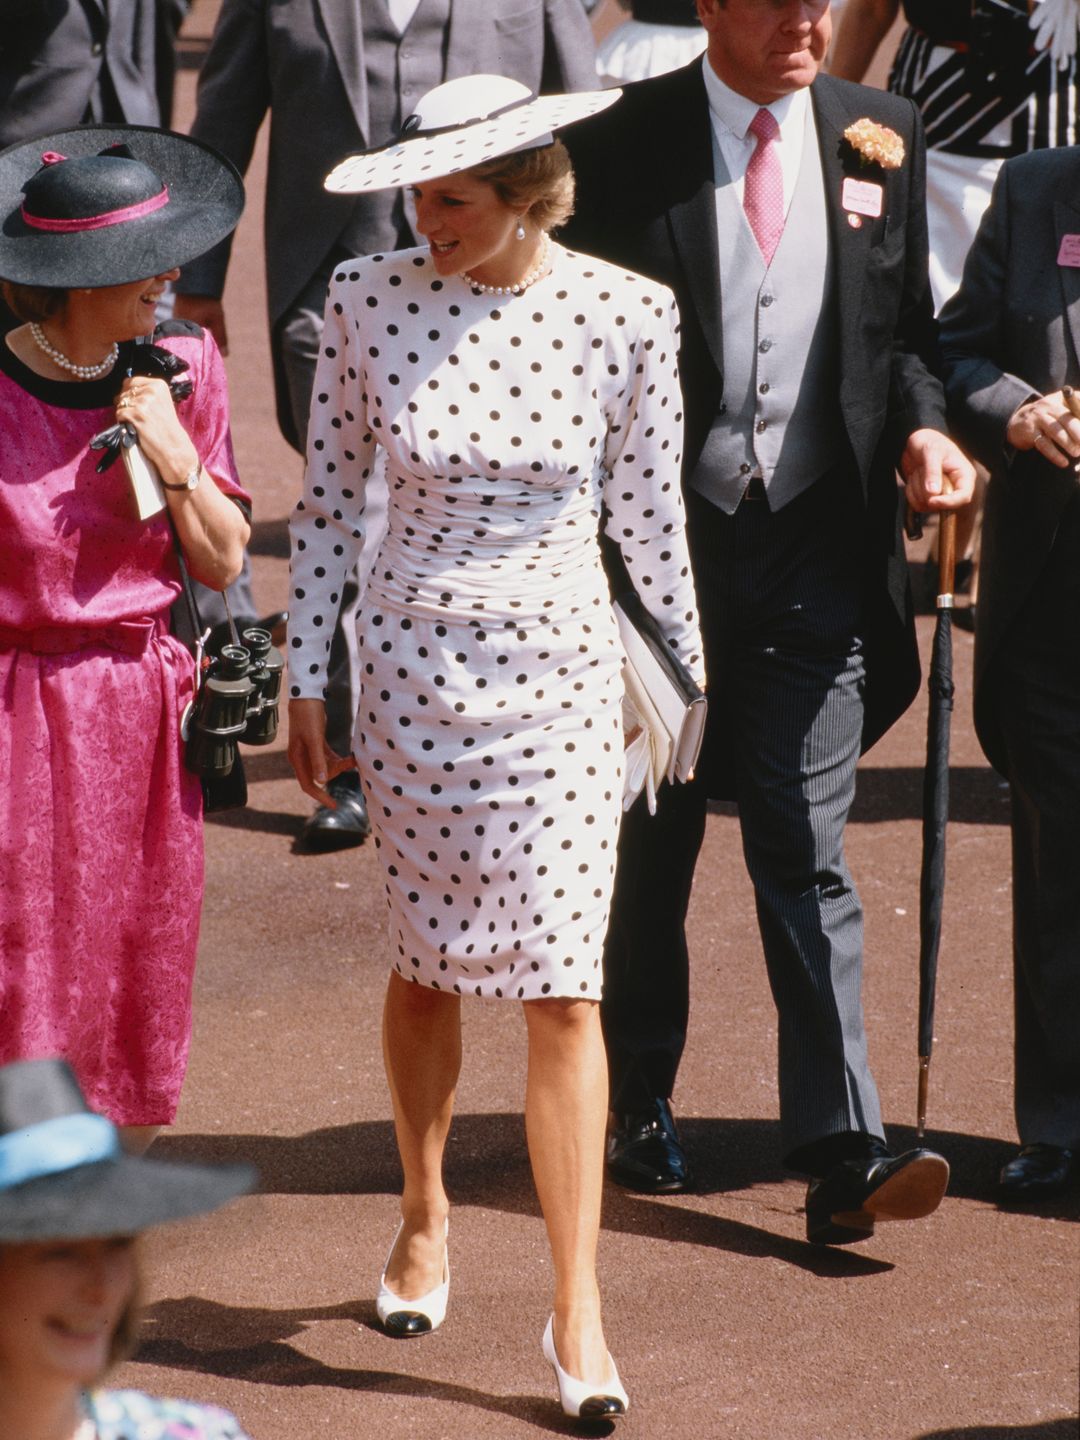 Diana, Princess of Wales attended Ascot race meeting in England, wearing a black and white spotted dress by Victor Edelstein and a Philip Somerville hat, June 1988.  